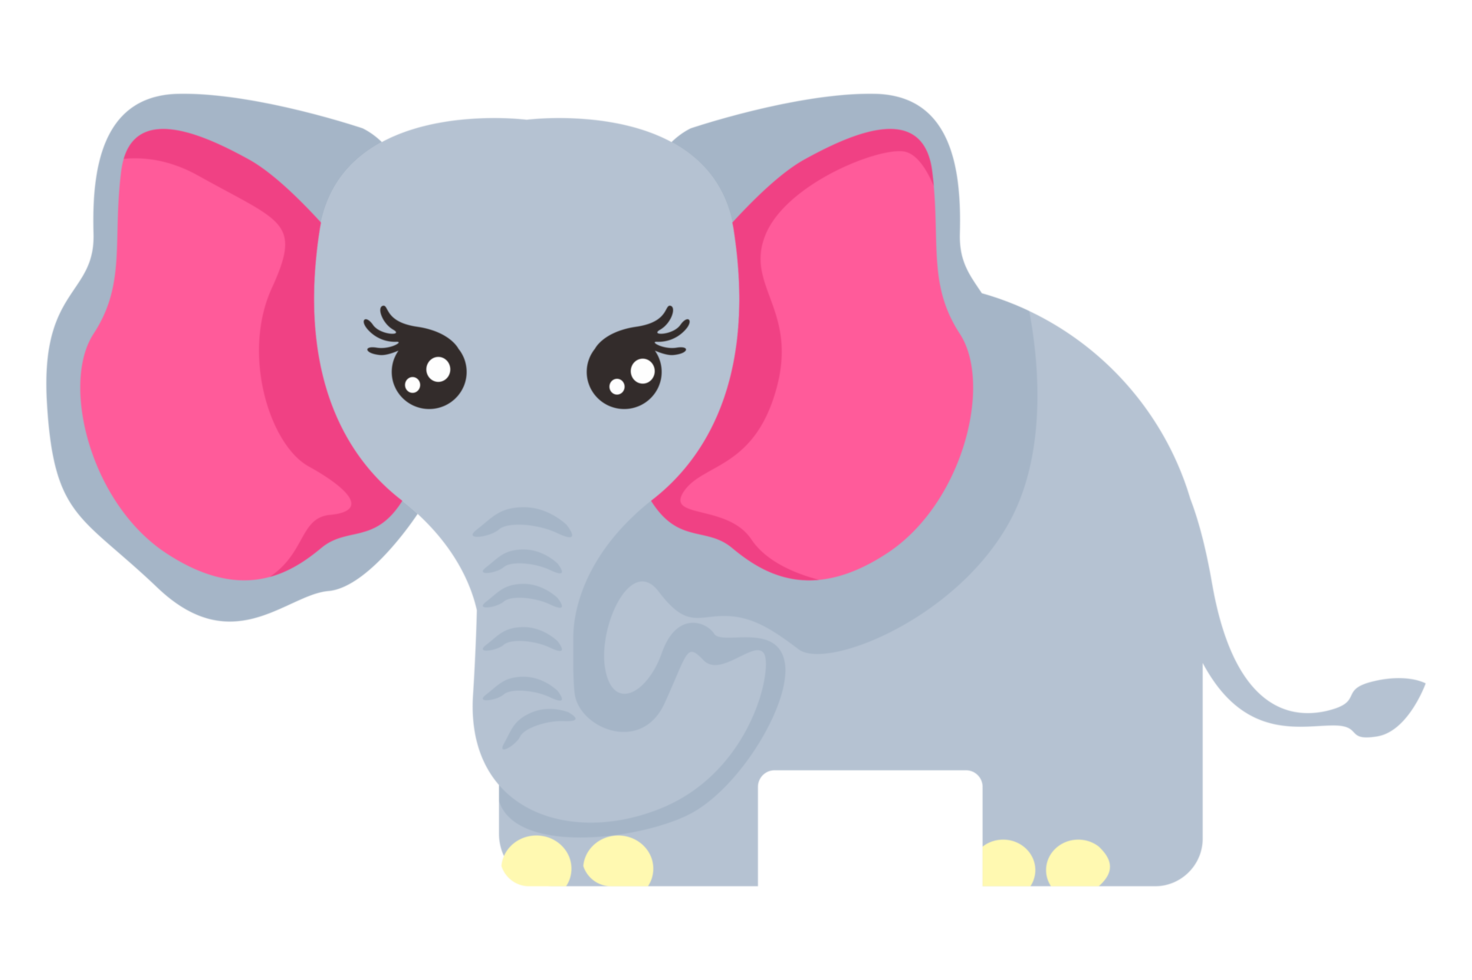 Adorable Elephant for Design png